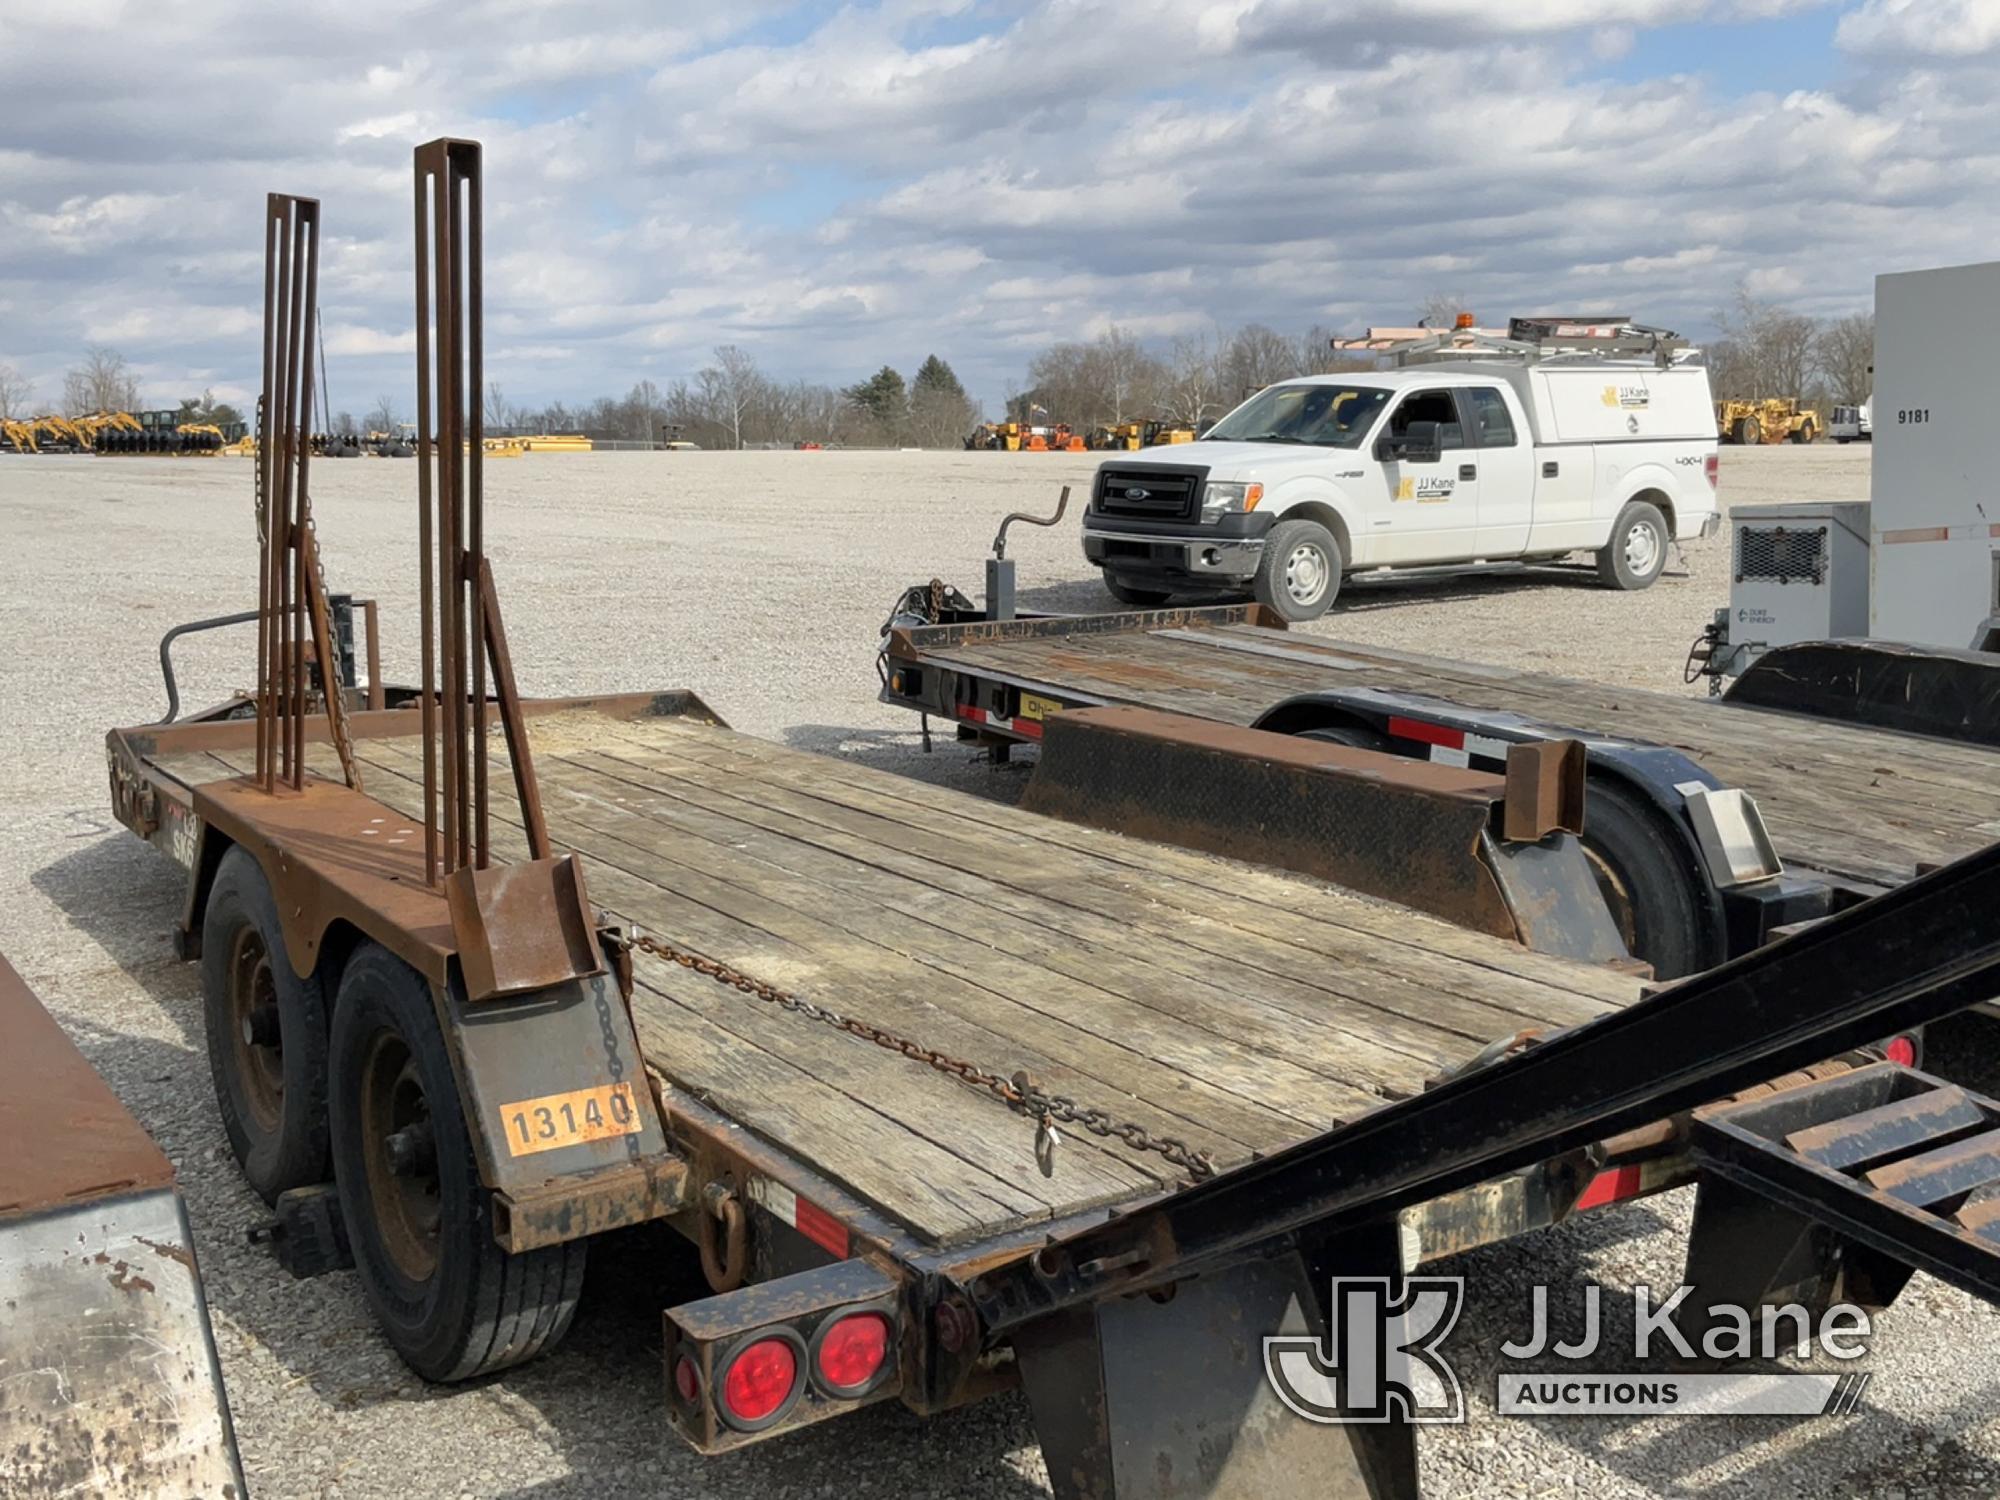 (Verona, KY) 2011 Eager Beaver SK6 T/A Tagalong Equipment Trailer Missing Ramp Chain, Rust Damage) (